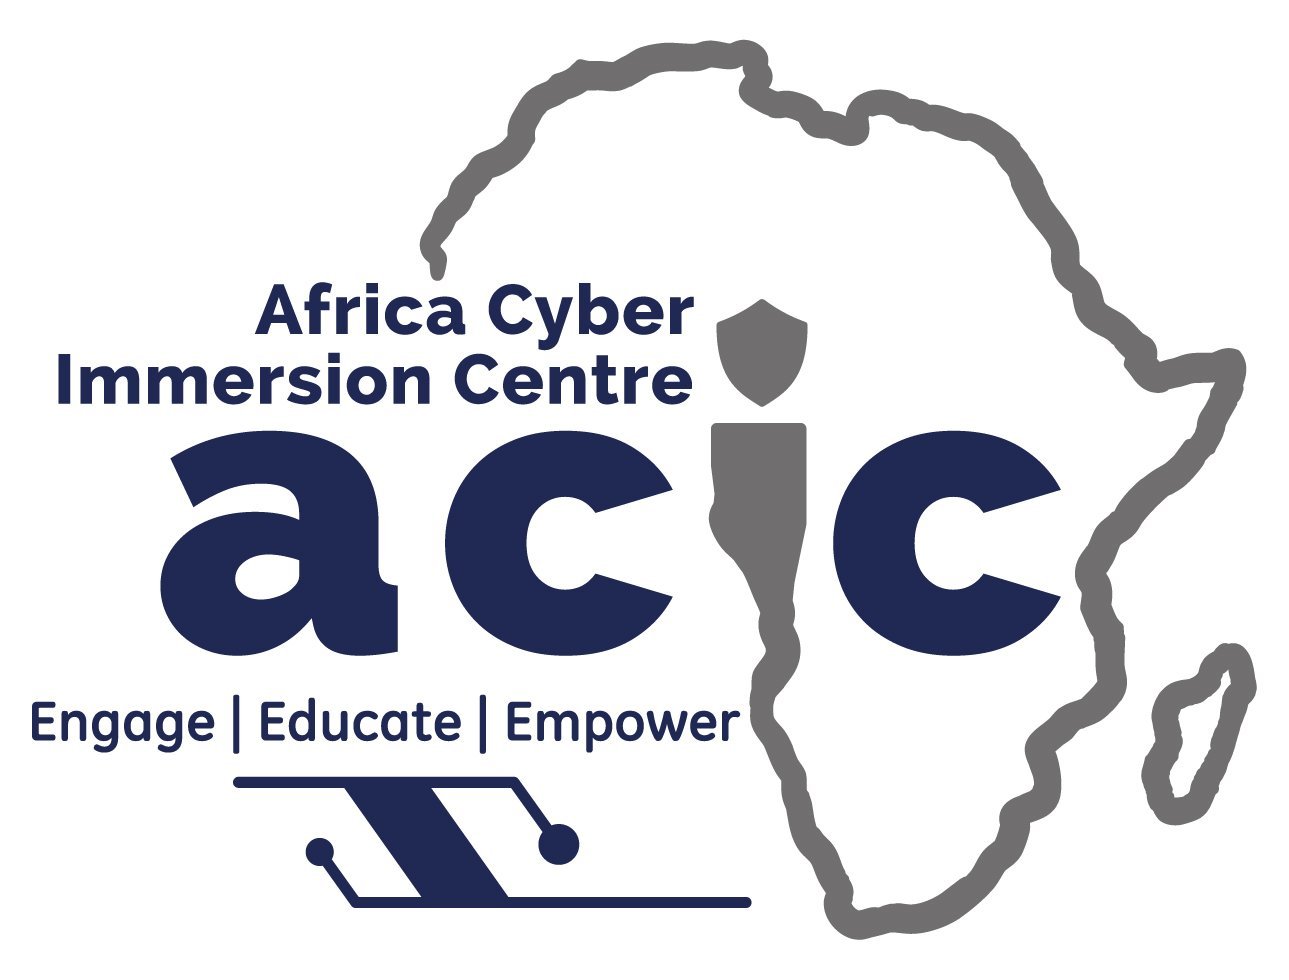 Africa Cyber Immersion Center